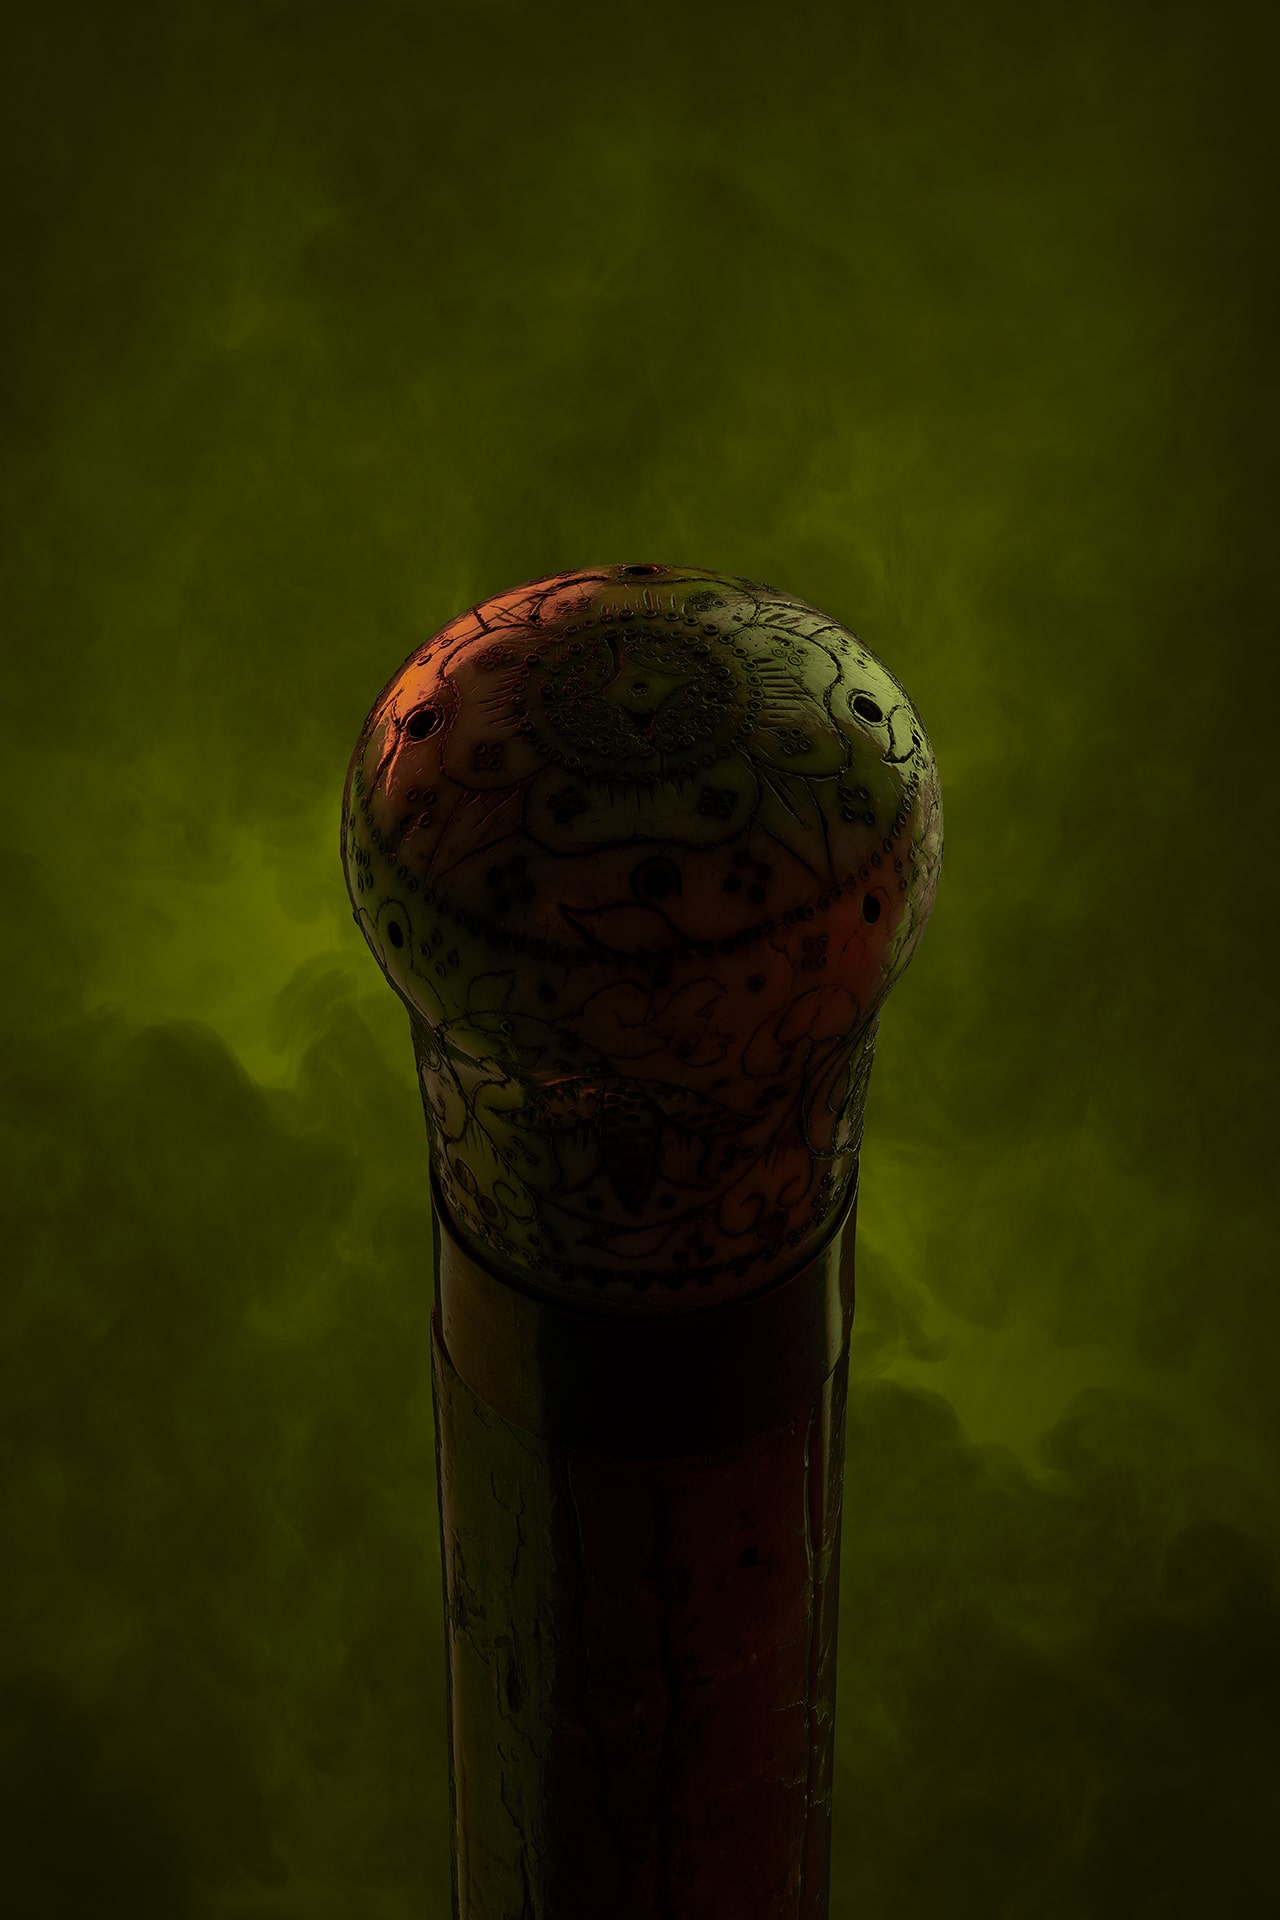 Mysterious item with bulbous end on dark green smoky background